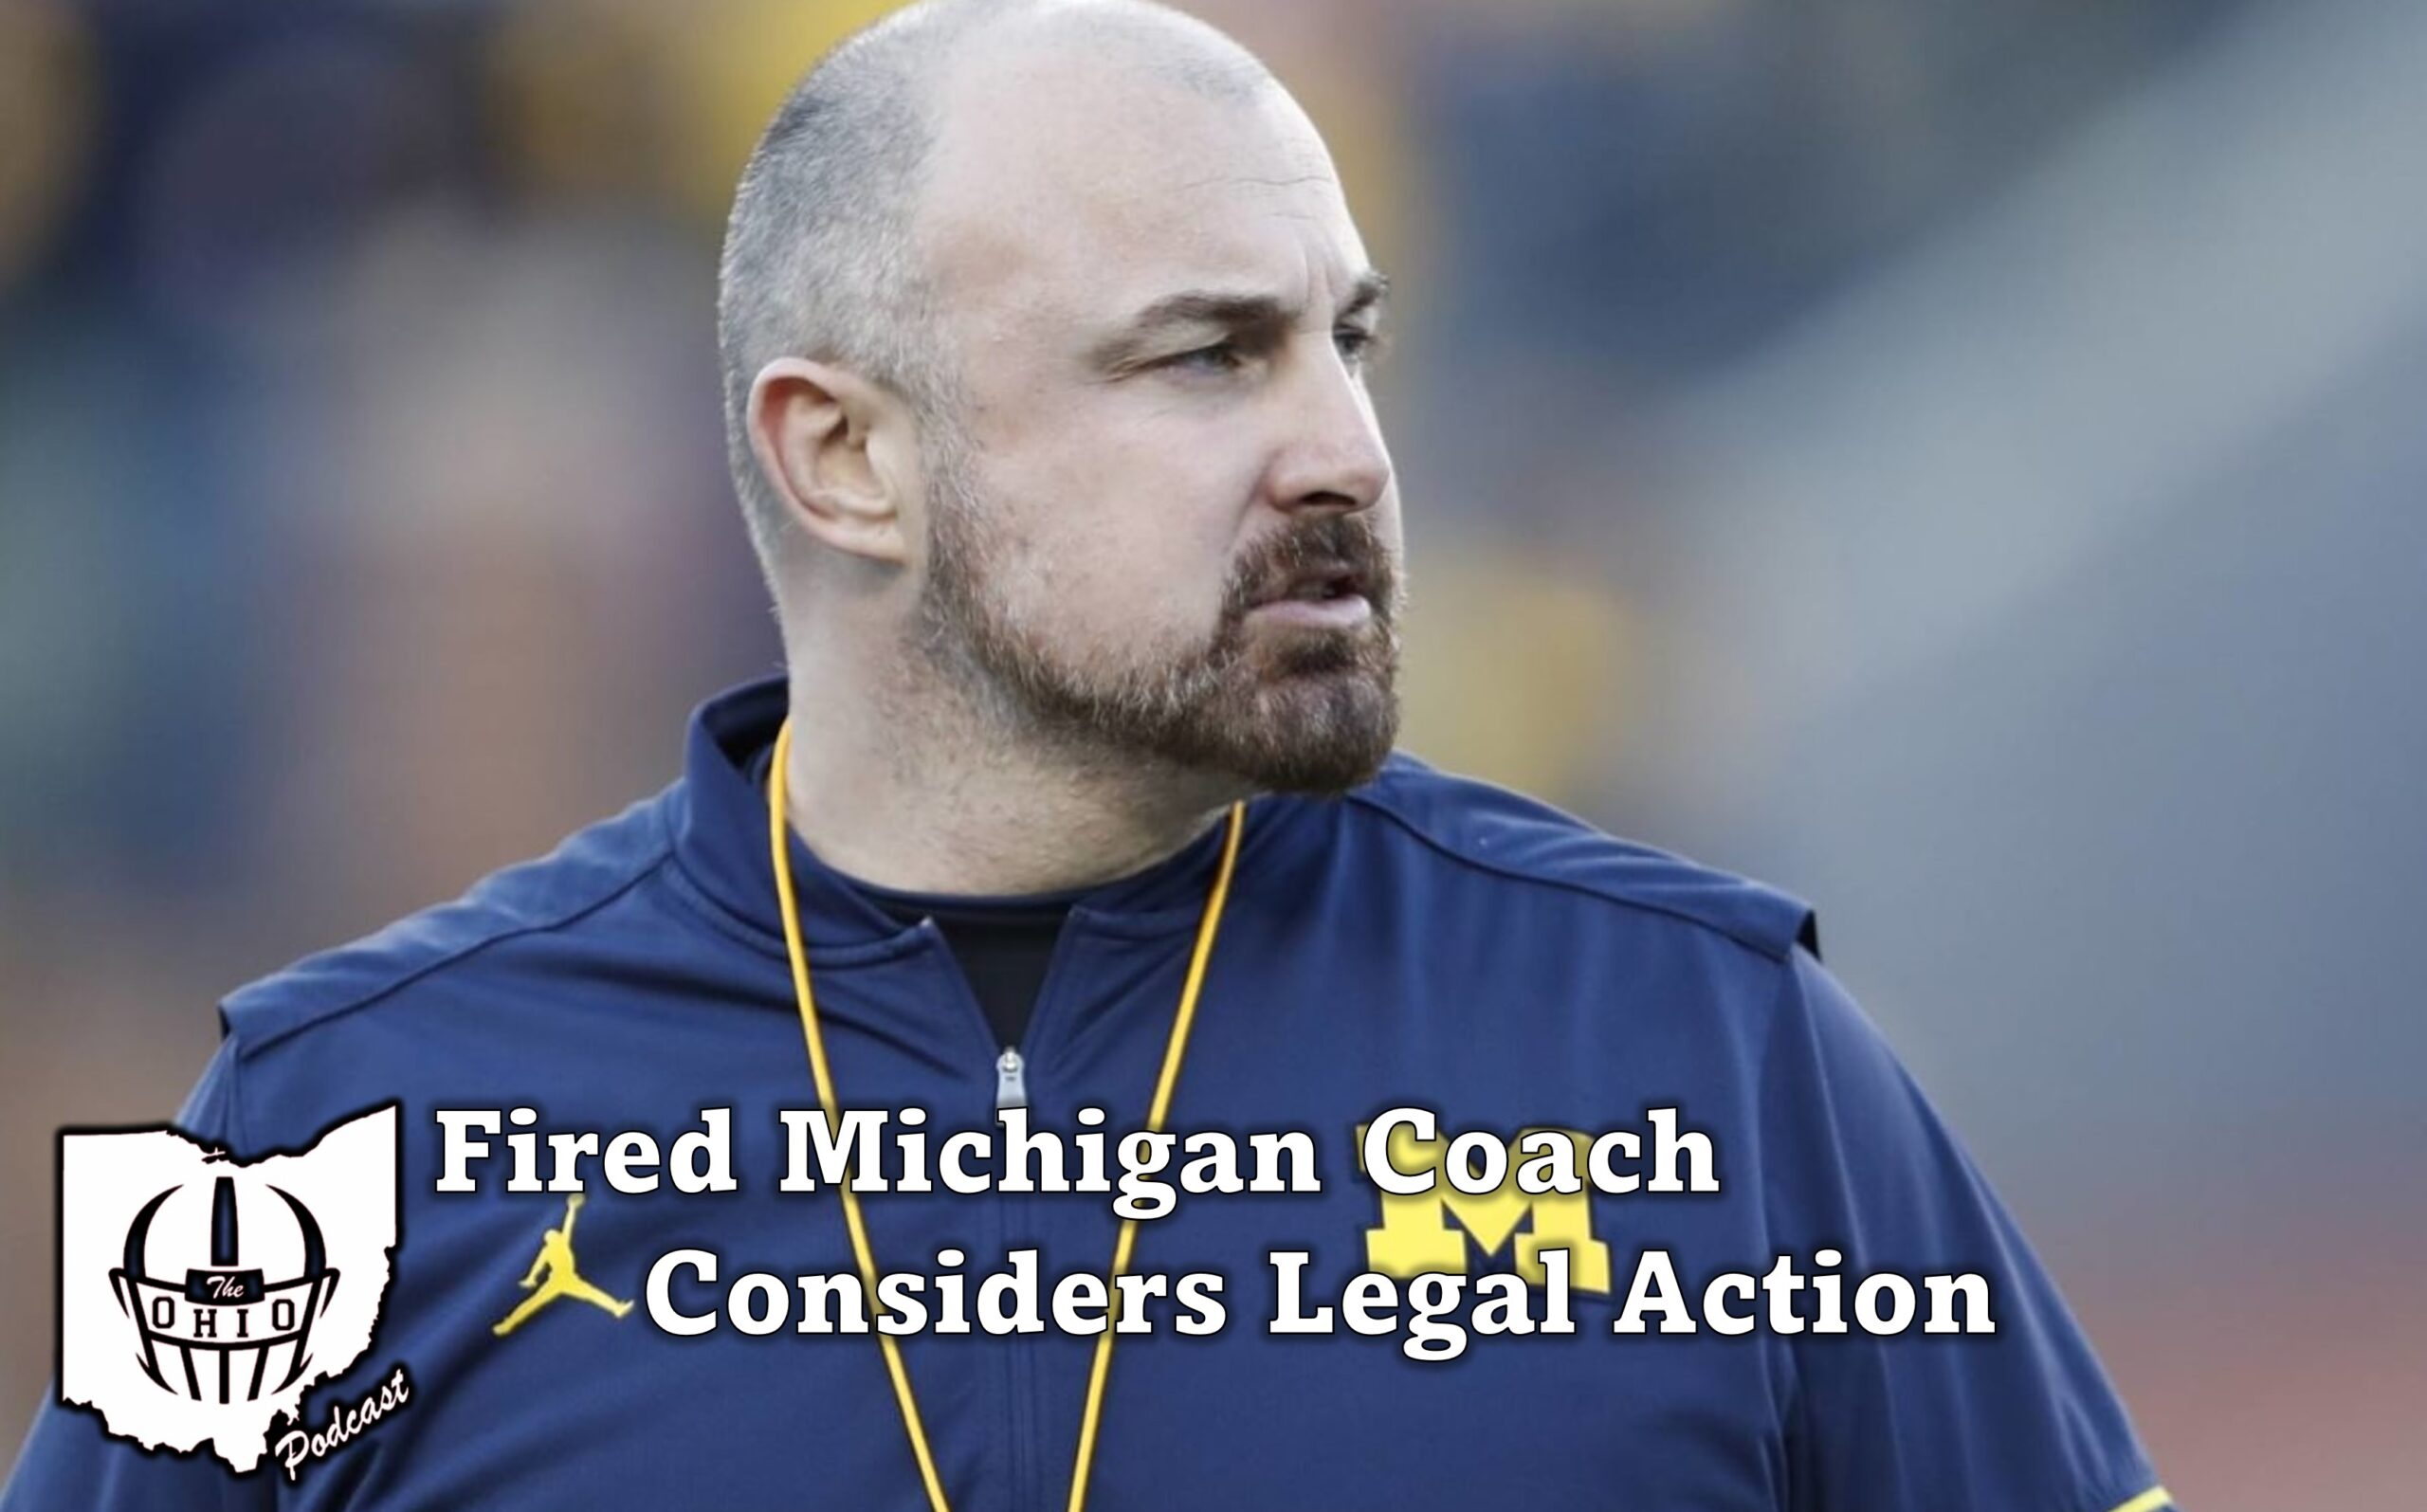 Former Michigan Coach Chris Partridge Considers Legal Action Over Firing